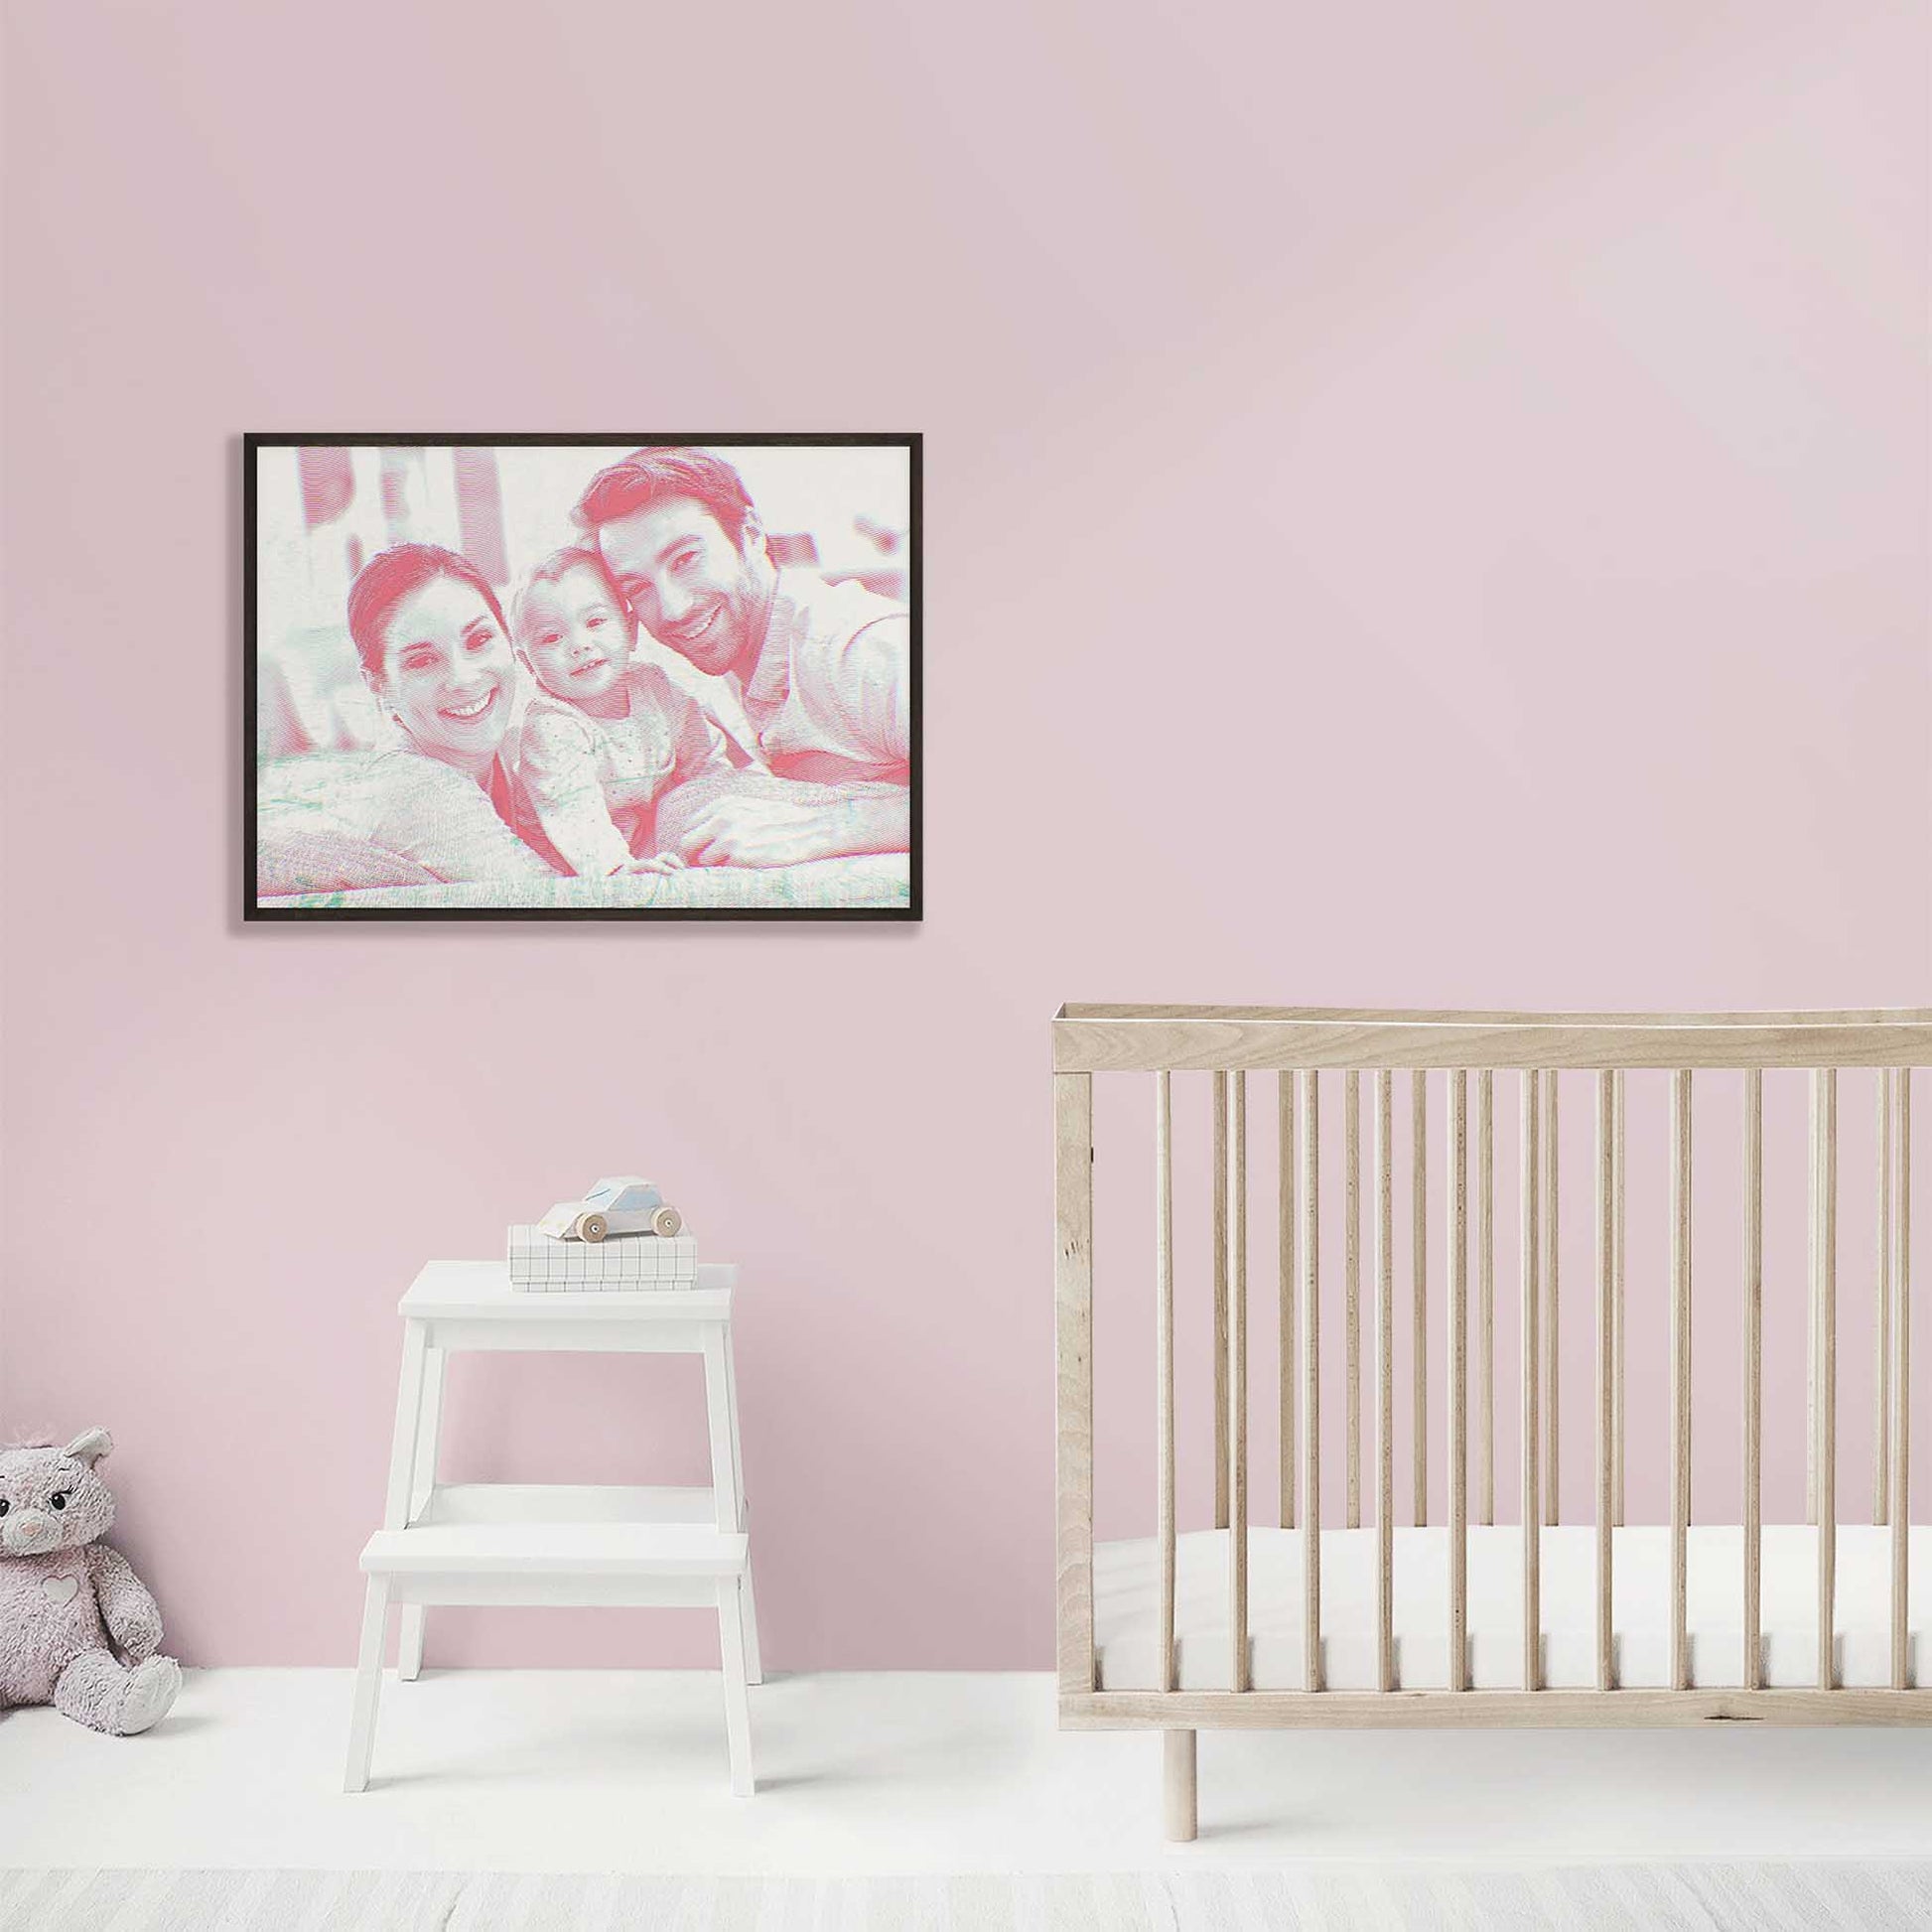 Personalised Pink Engraving Framed Print: A cool and modern addition to your home decor. The engraving effect adds a unique and contemporary style, making it stand out. Made to order, each print brings comfort, relaxation, inspiration